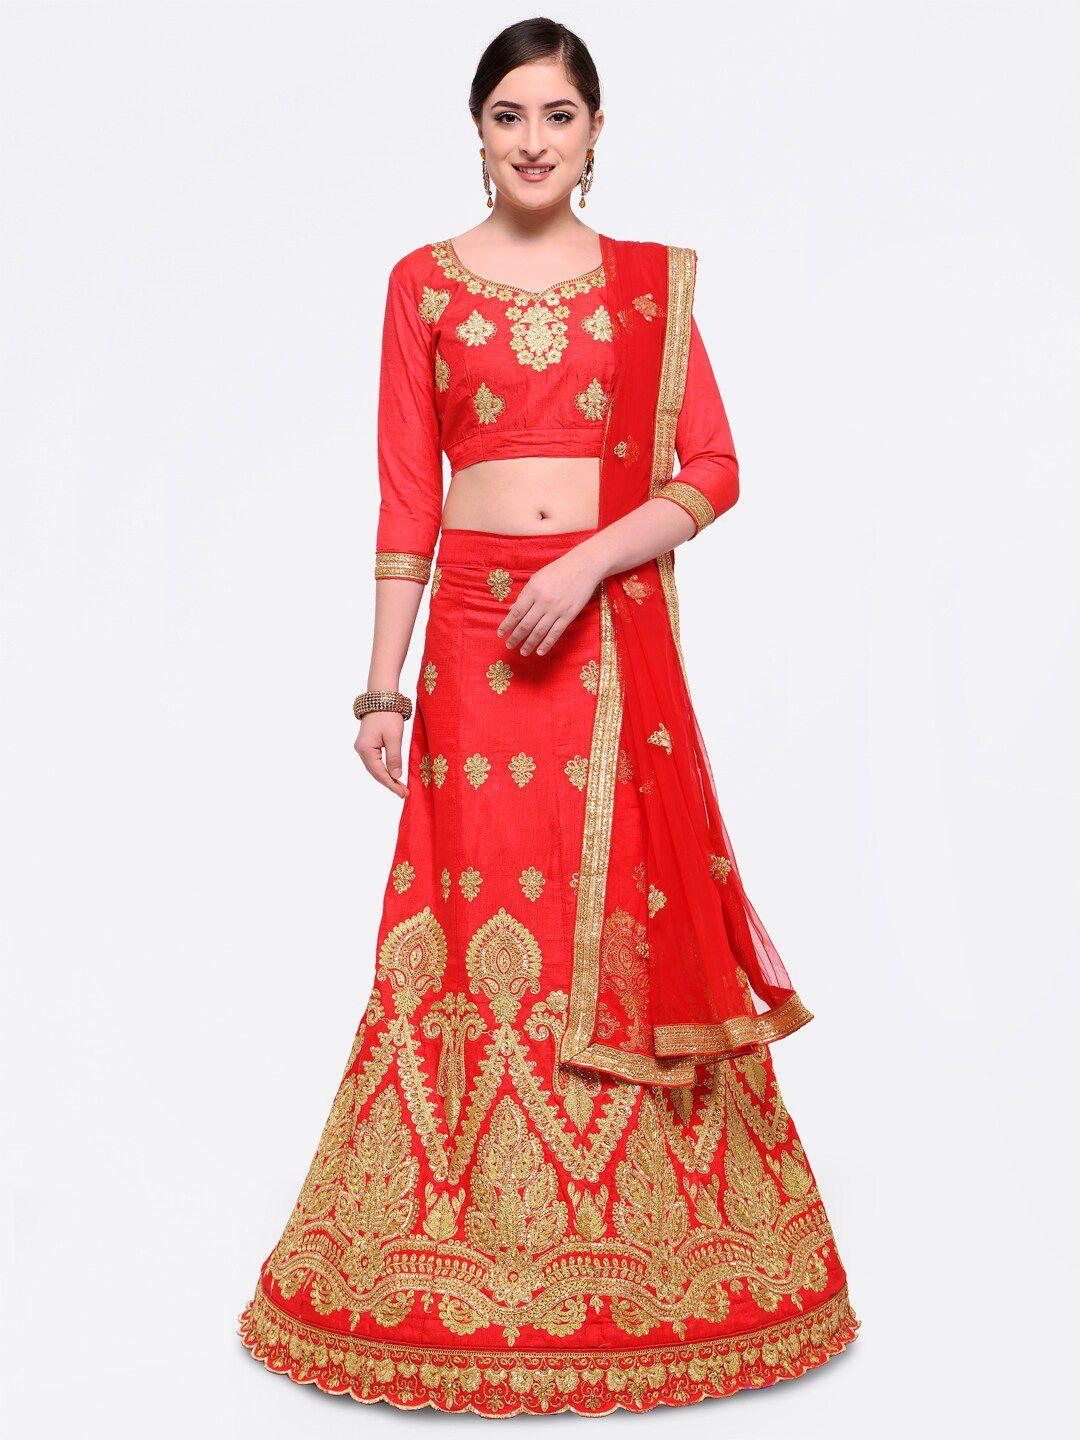 manvaa red & gold-toned embroidered semi-stitched lehenga & unstitched blouse with dupatta